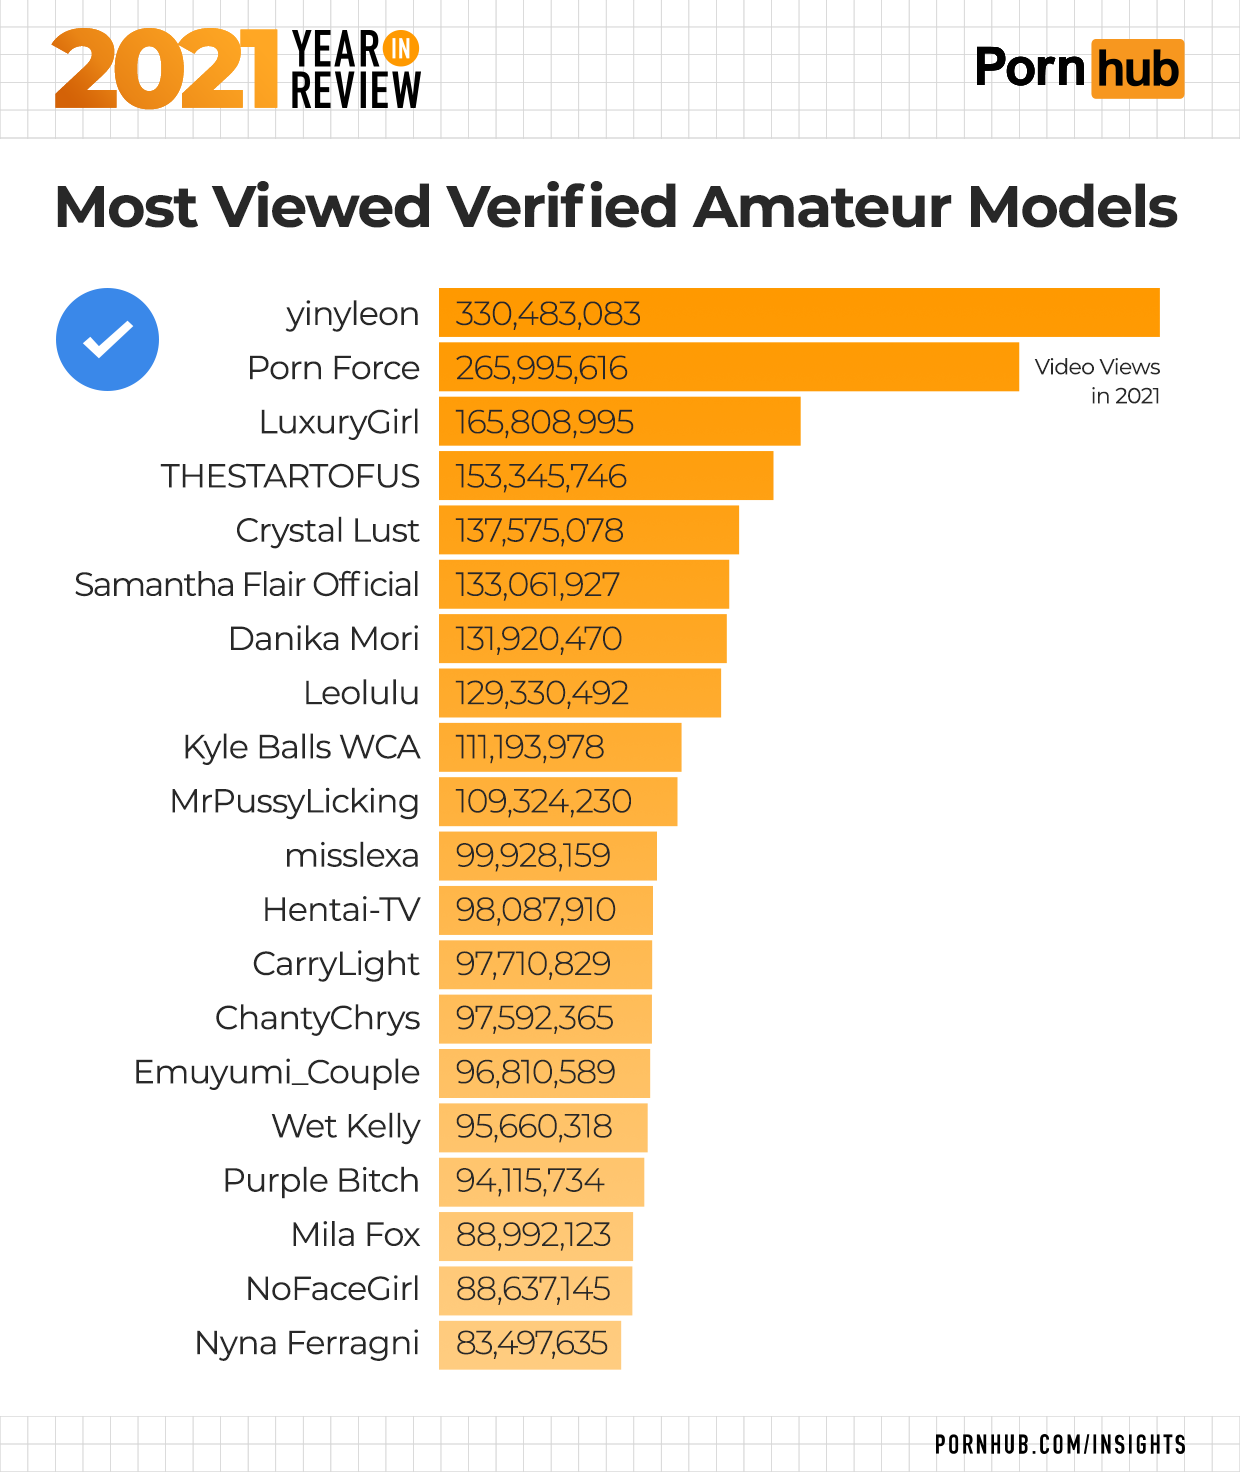 Most watched porn video of all time